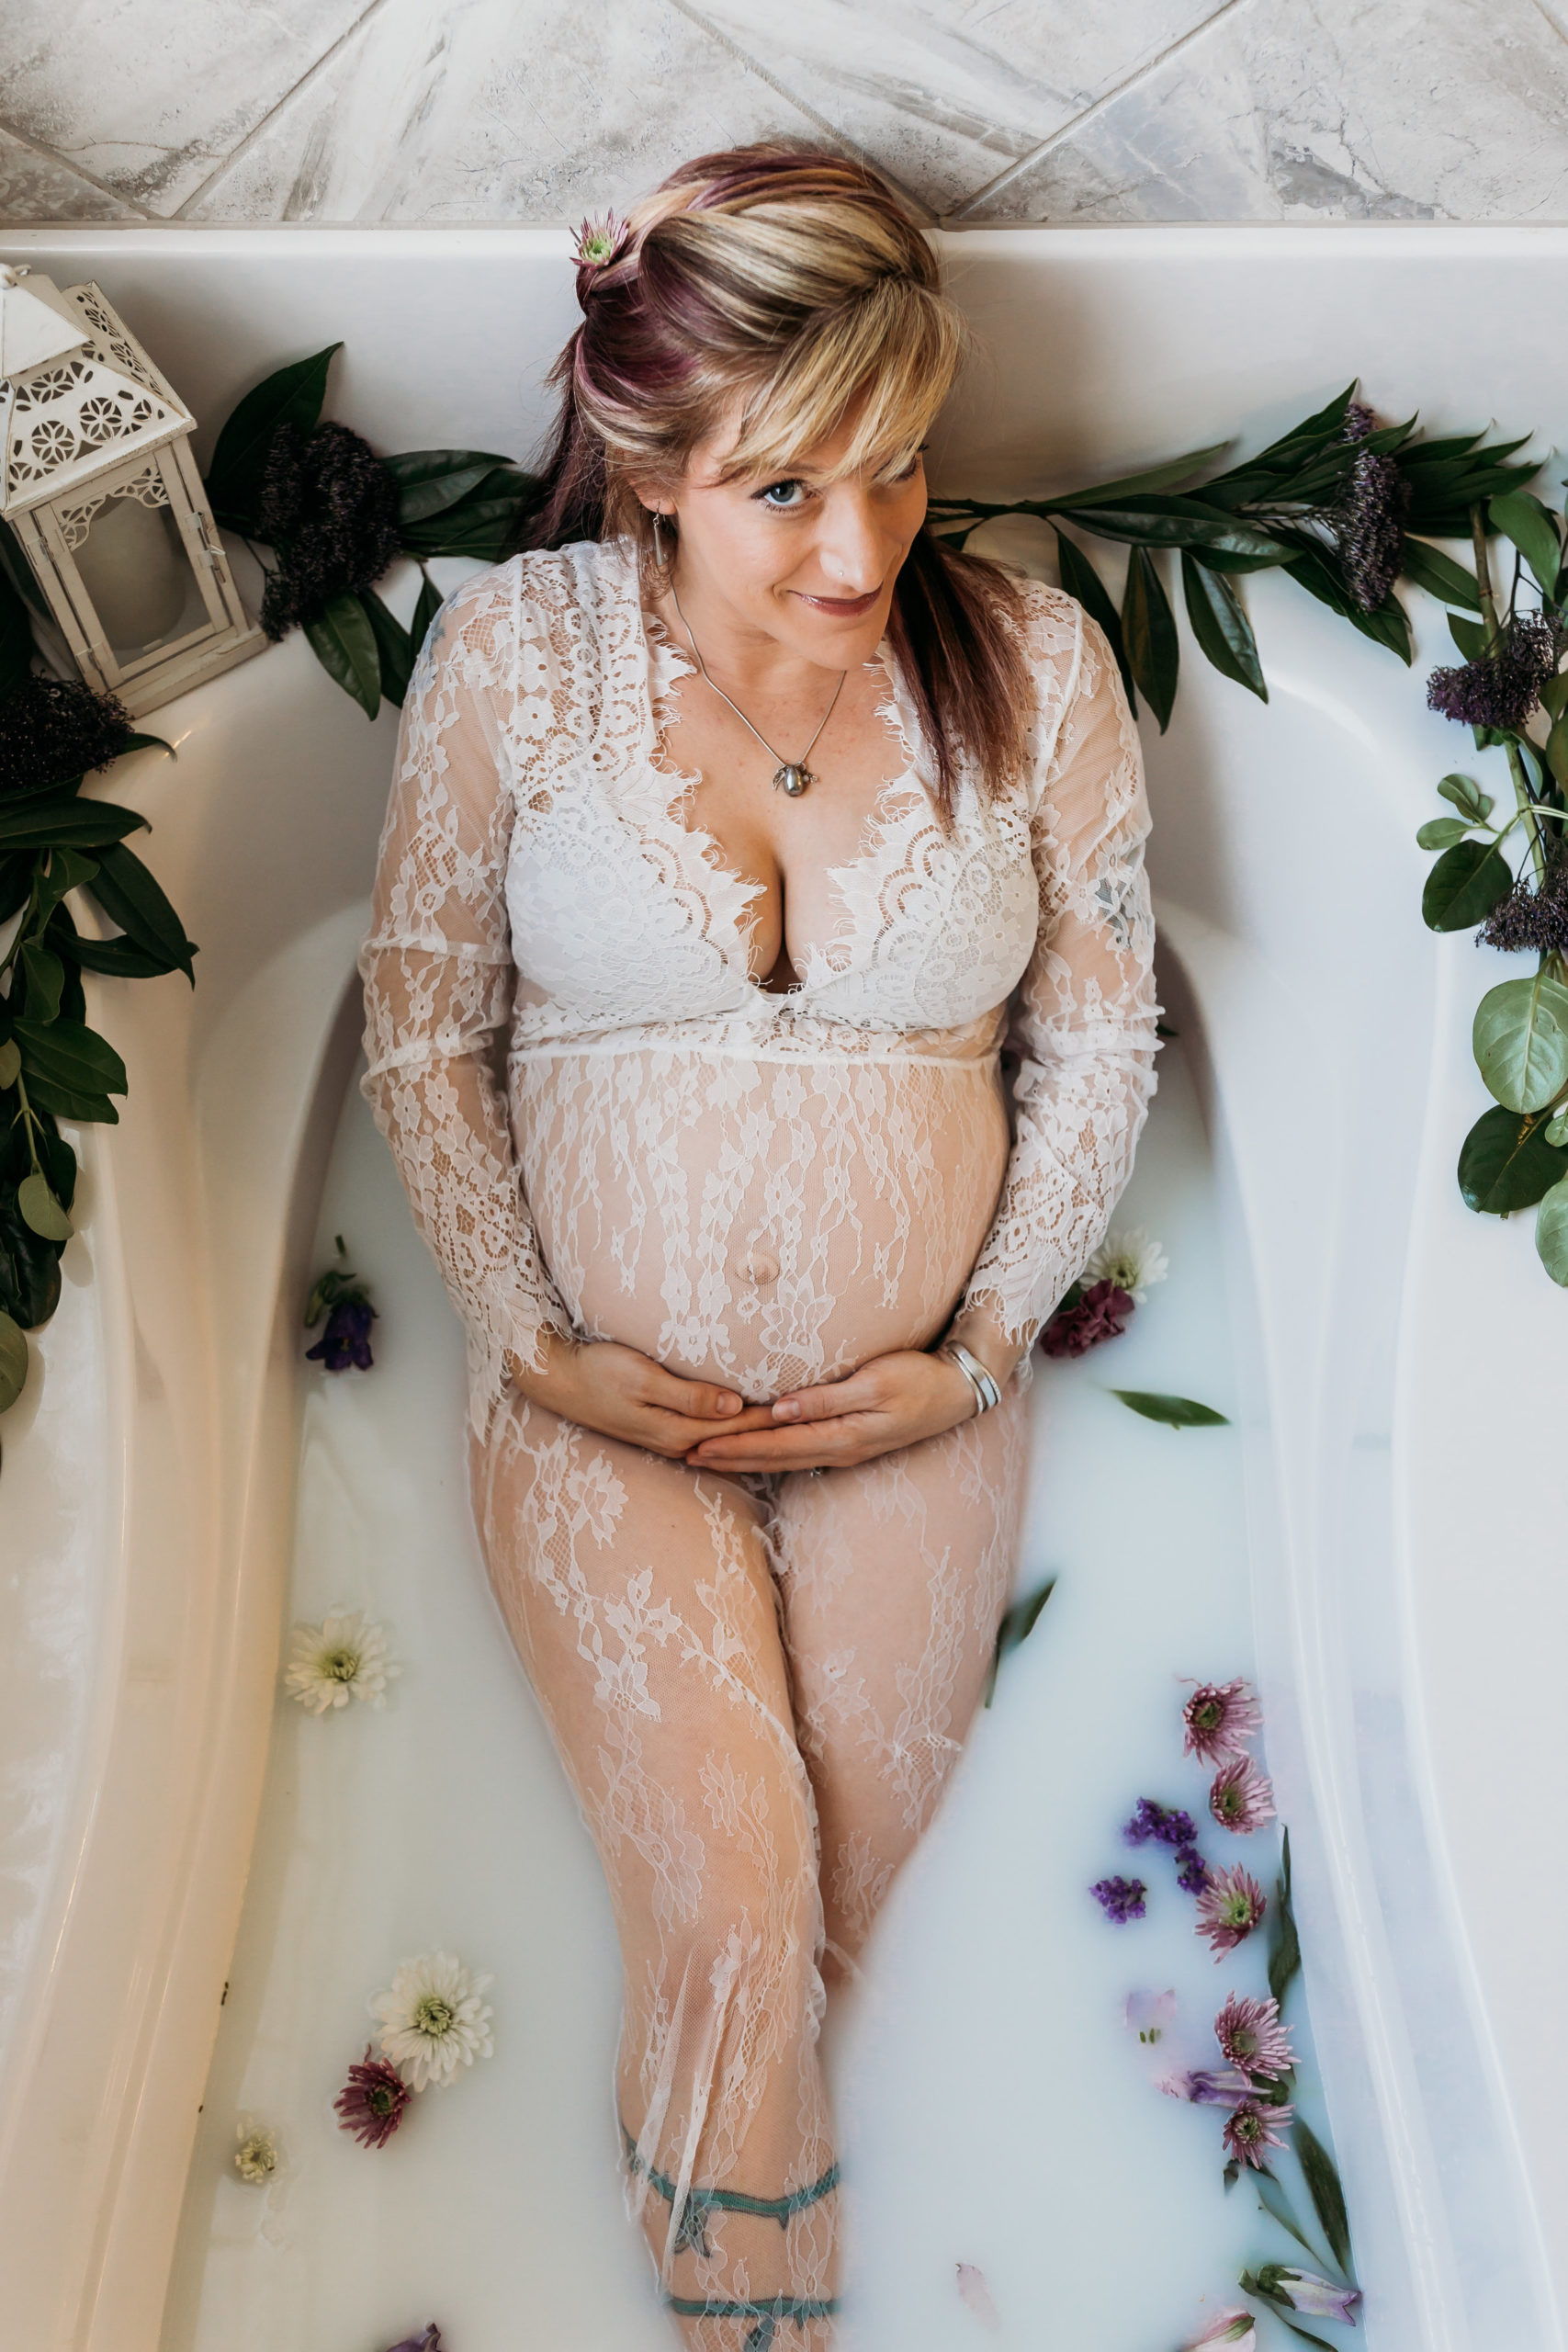 woman holding pregnant belly in milk bath